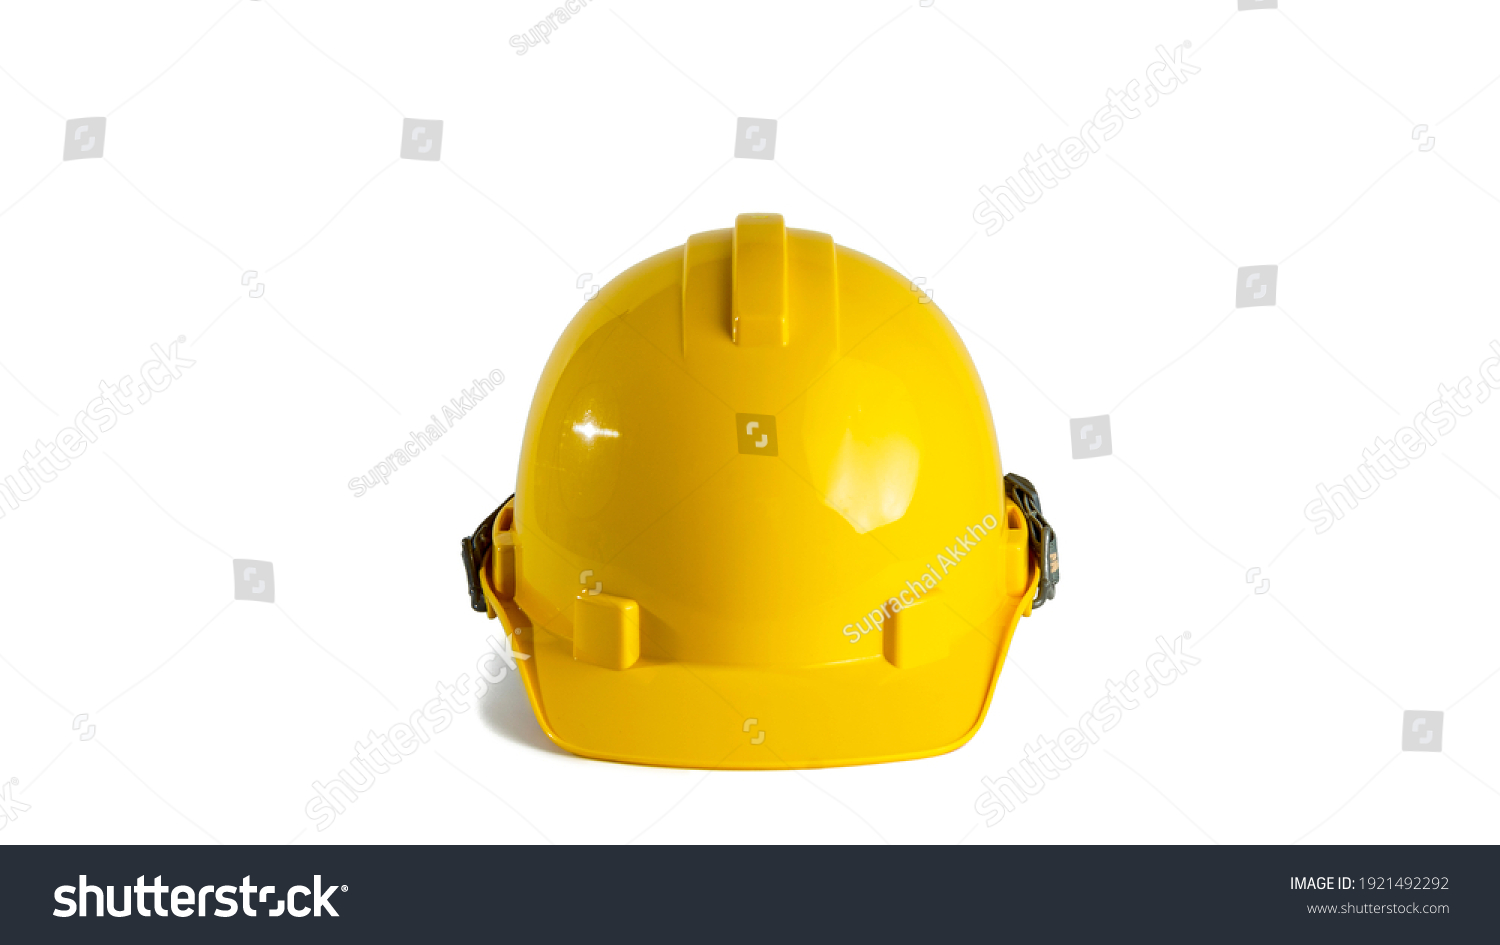 yellow safety hat isolated on white background #1921492292